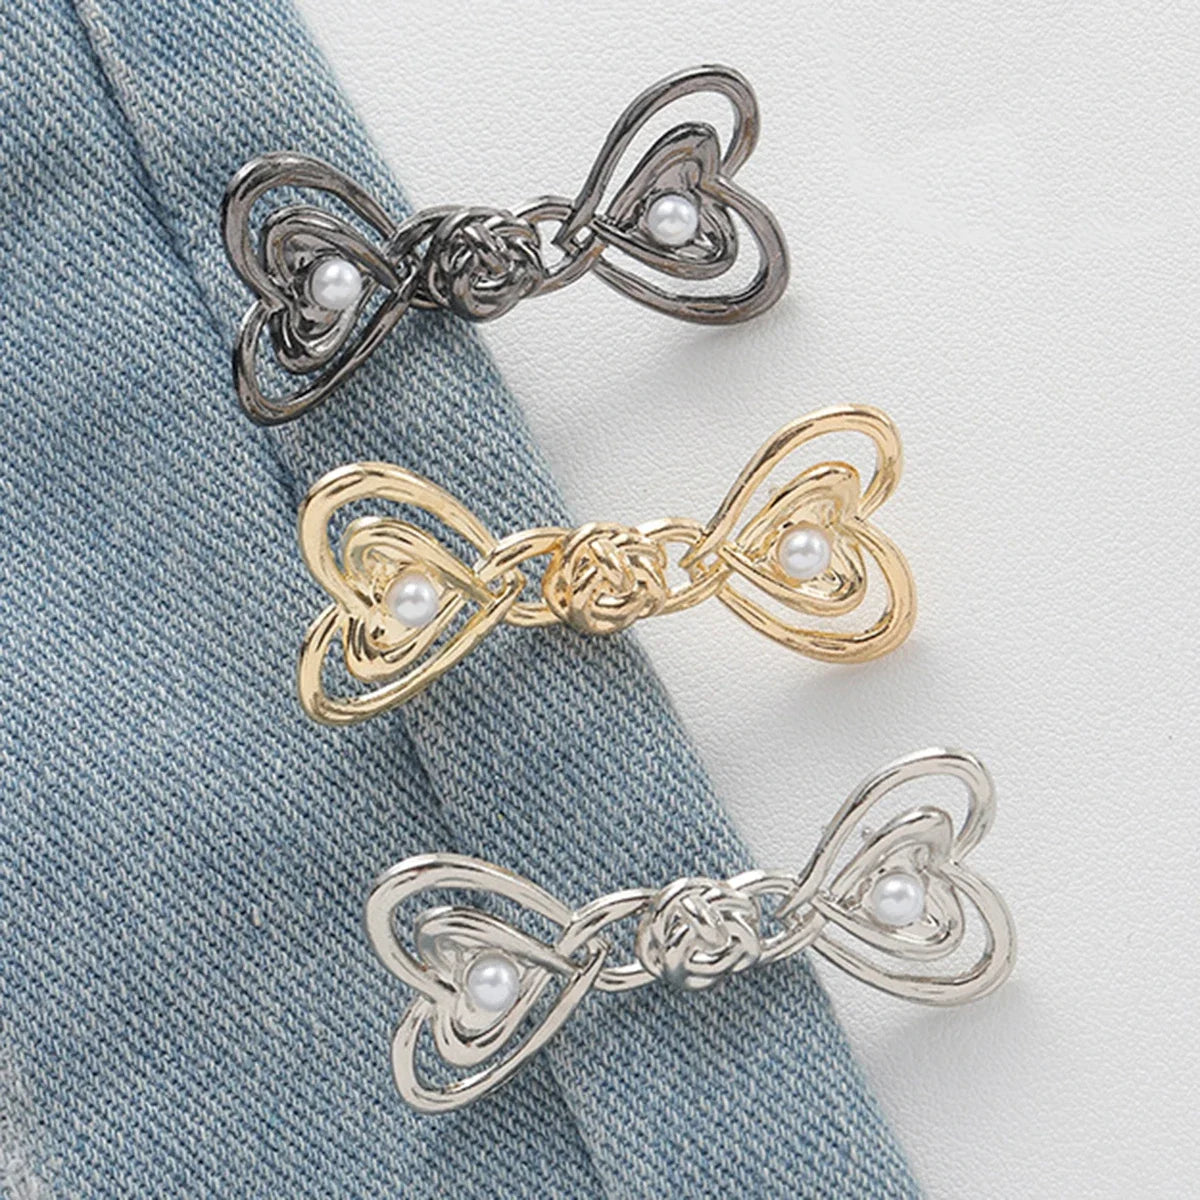 Adjustable Detachable Heart Button Fasteners No Sewing Required Waist Buckle for Jeans Adjuster for Pants and Skirts